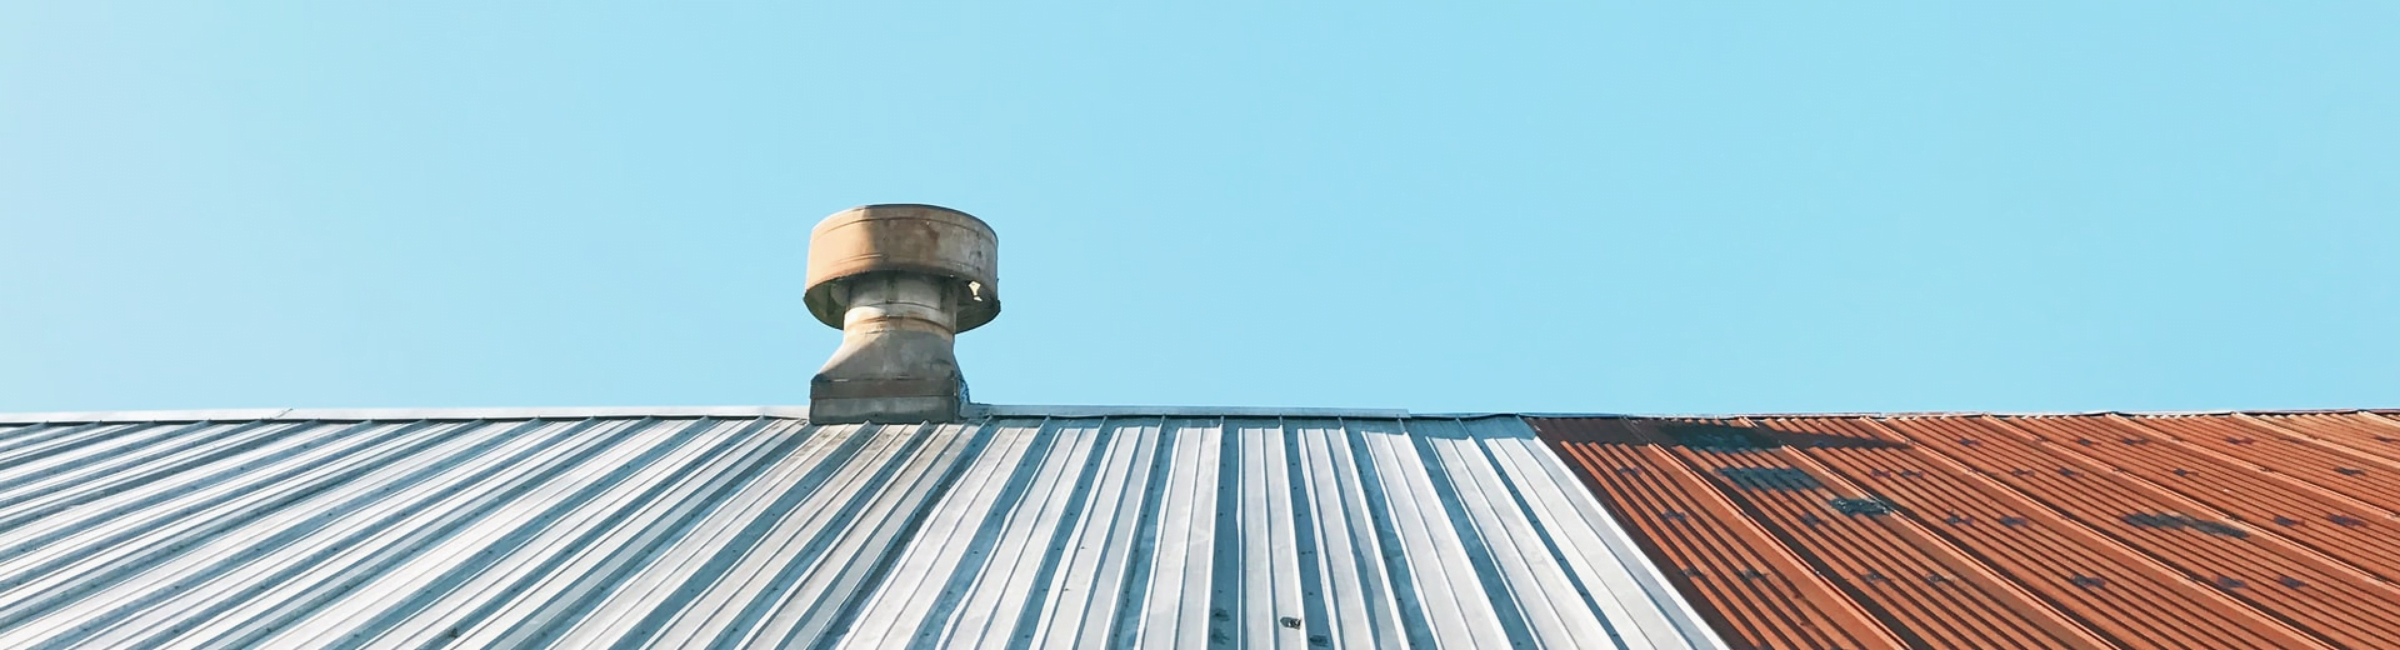 Old corrugated iron roof with vent